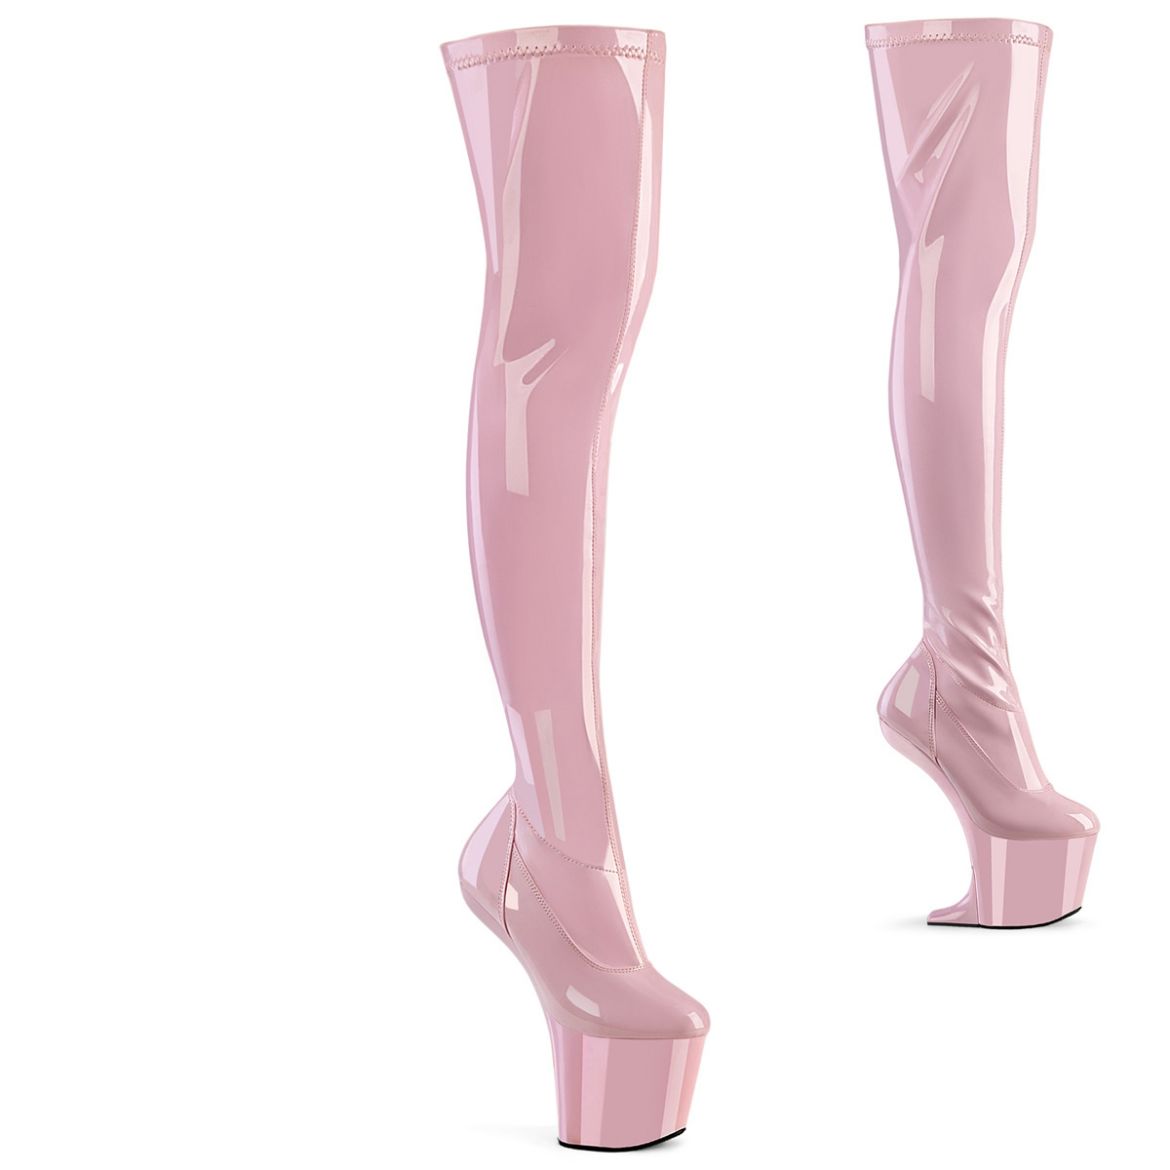 Product image of Pleaser CRAZE-3000 B. Pink Str. Pat/B. Pink 8 Inch Heelless 3 Inch PF Stretch Thigh Boot Inside Zip